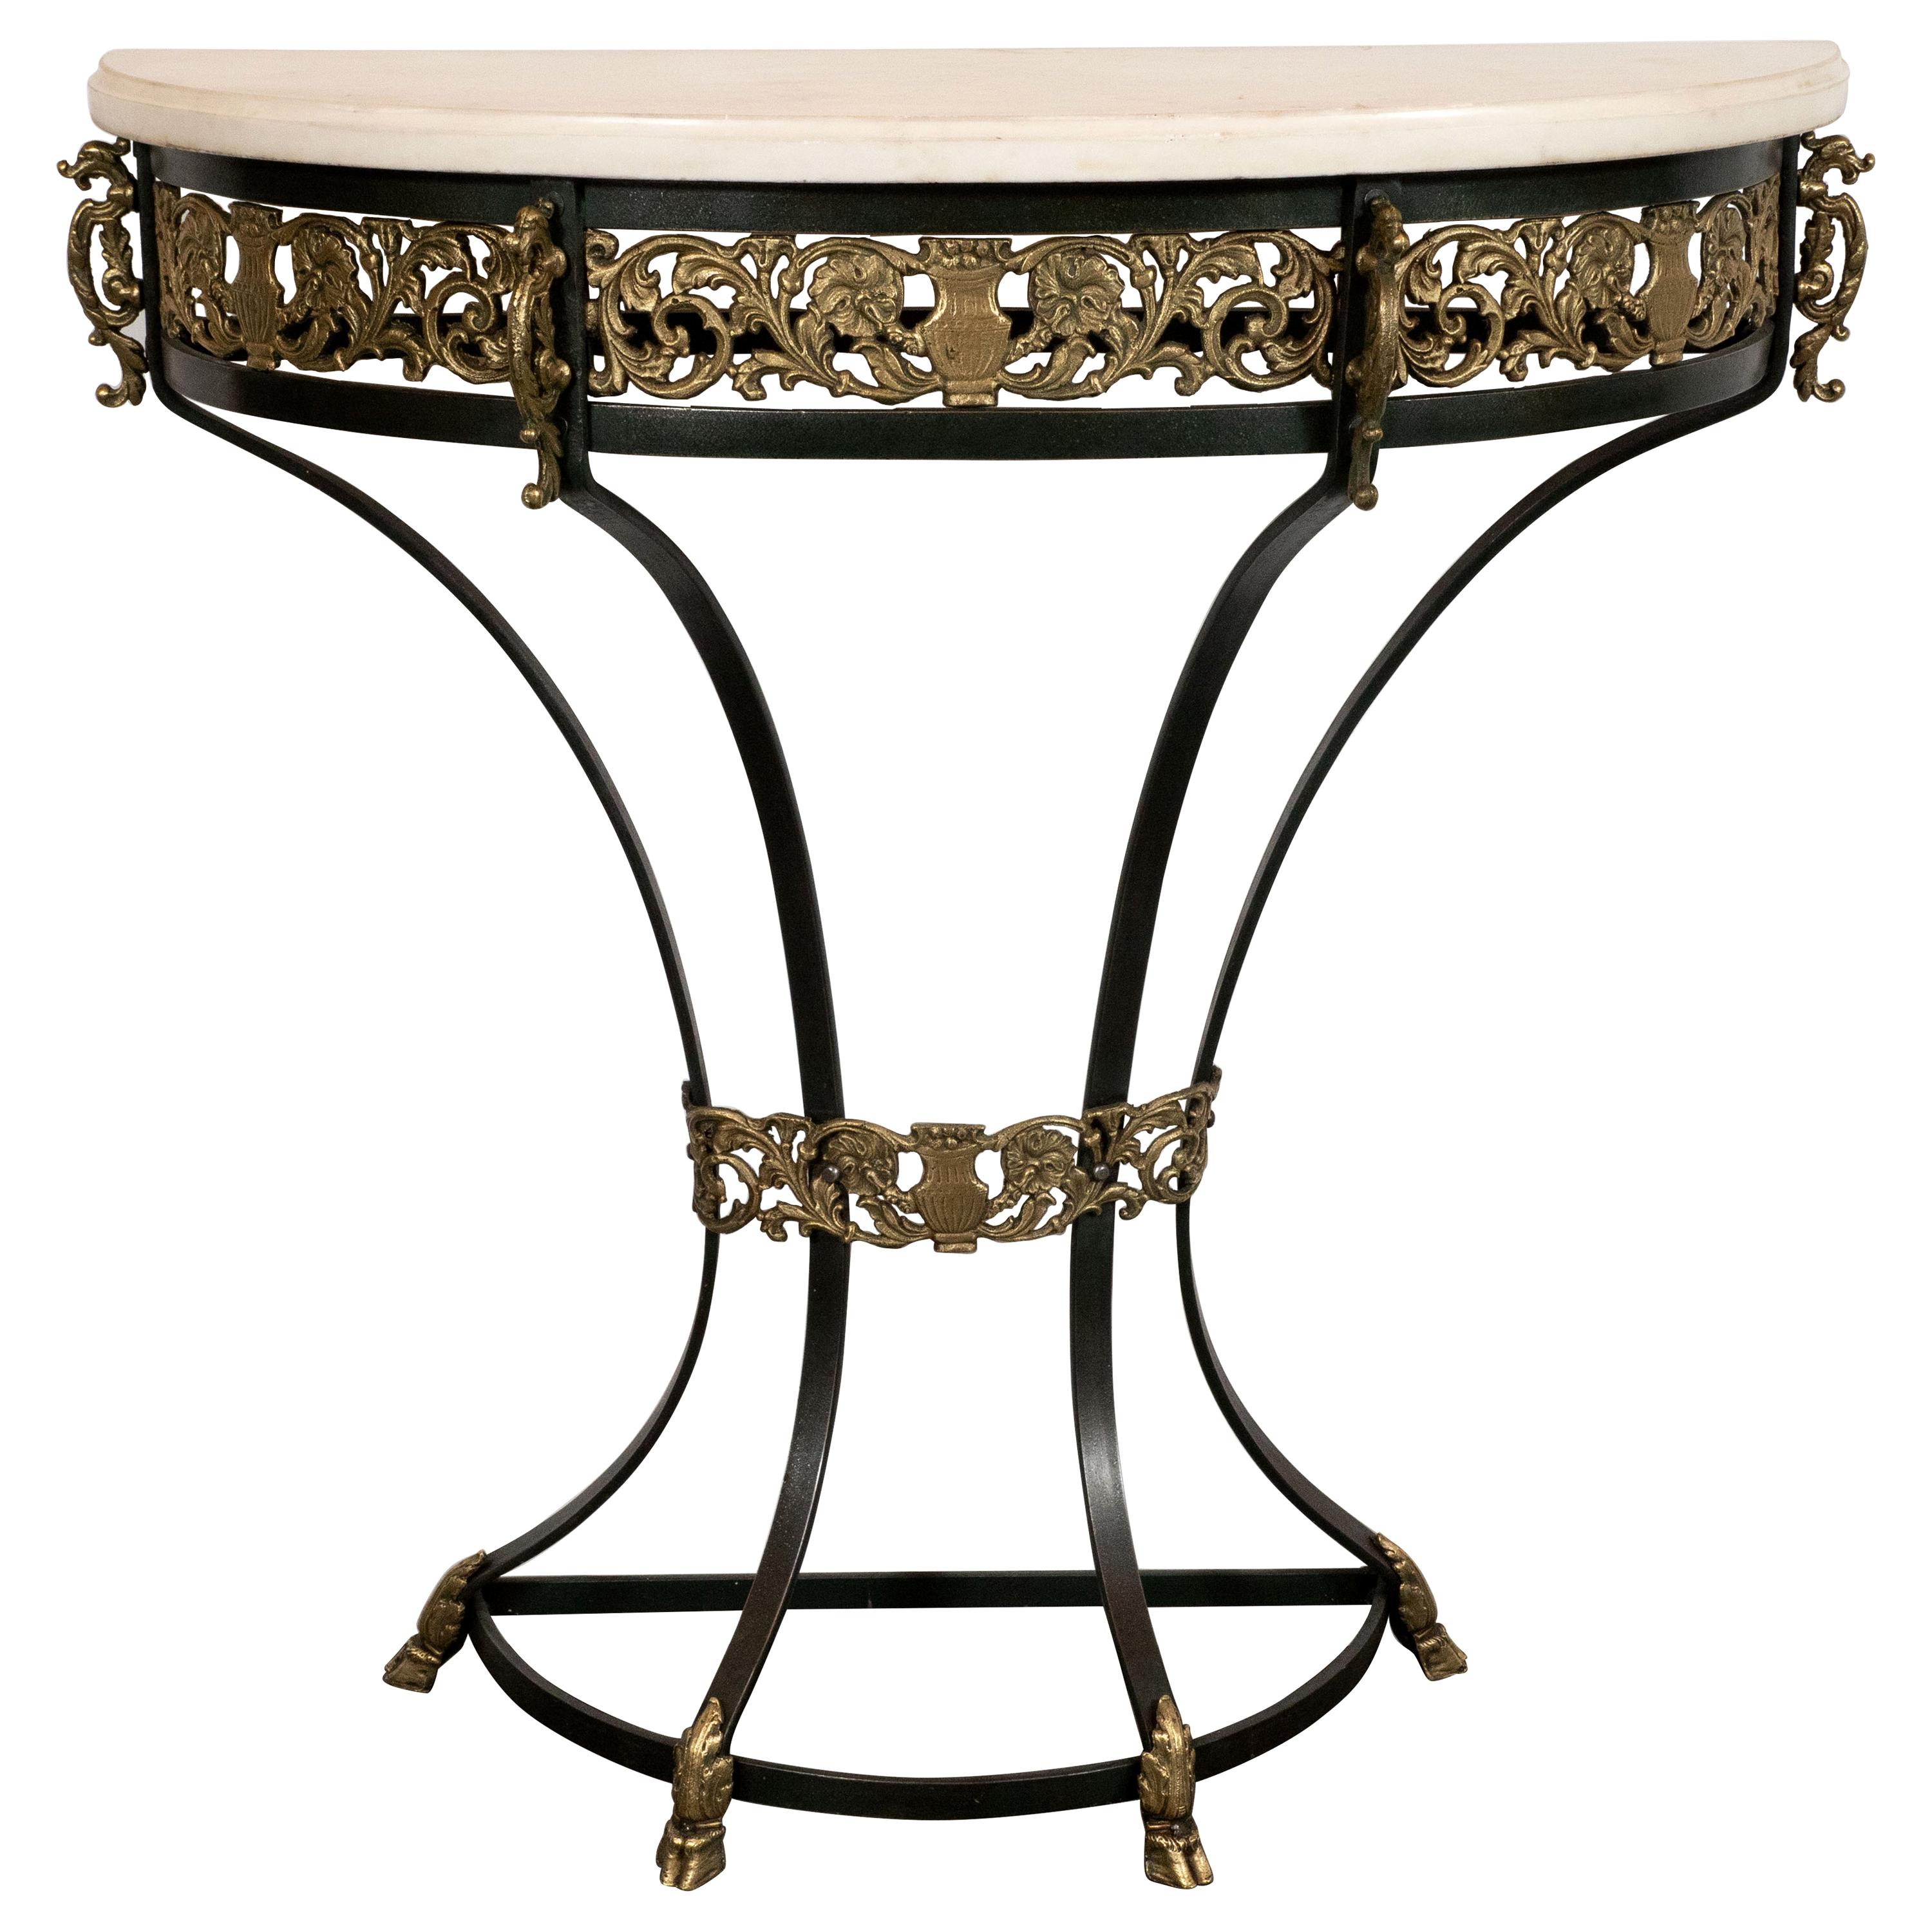 Art Deco Gilded Bronze and Carrara Marble Console Table with Baroque Detailing